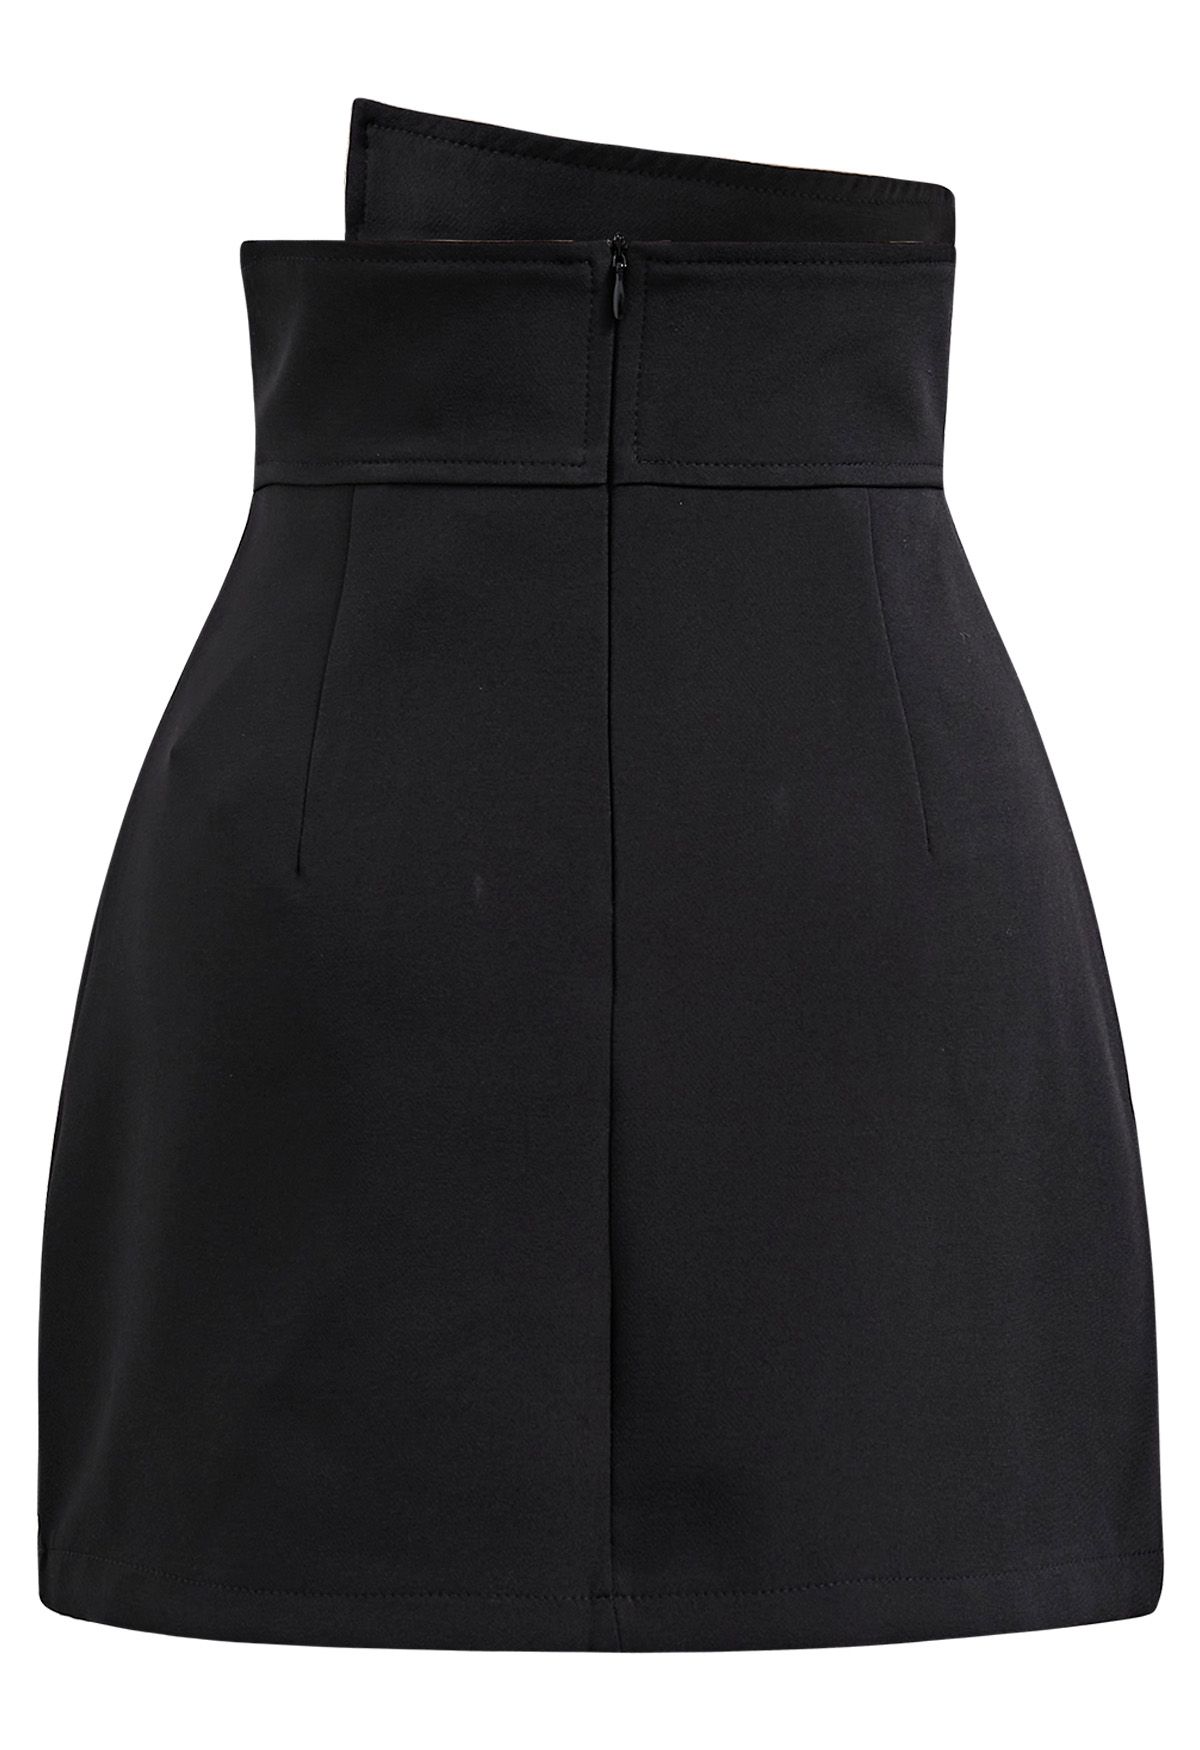 Asymmetric Buttoned Flap Mini Skirt in Black - Retro, Indie and Unique ...